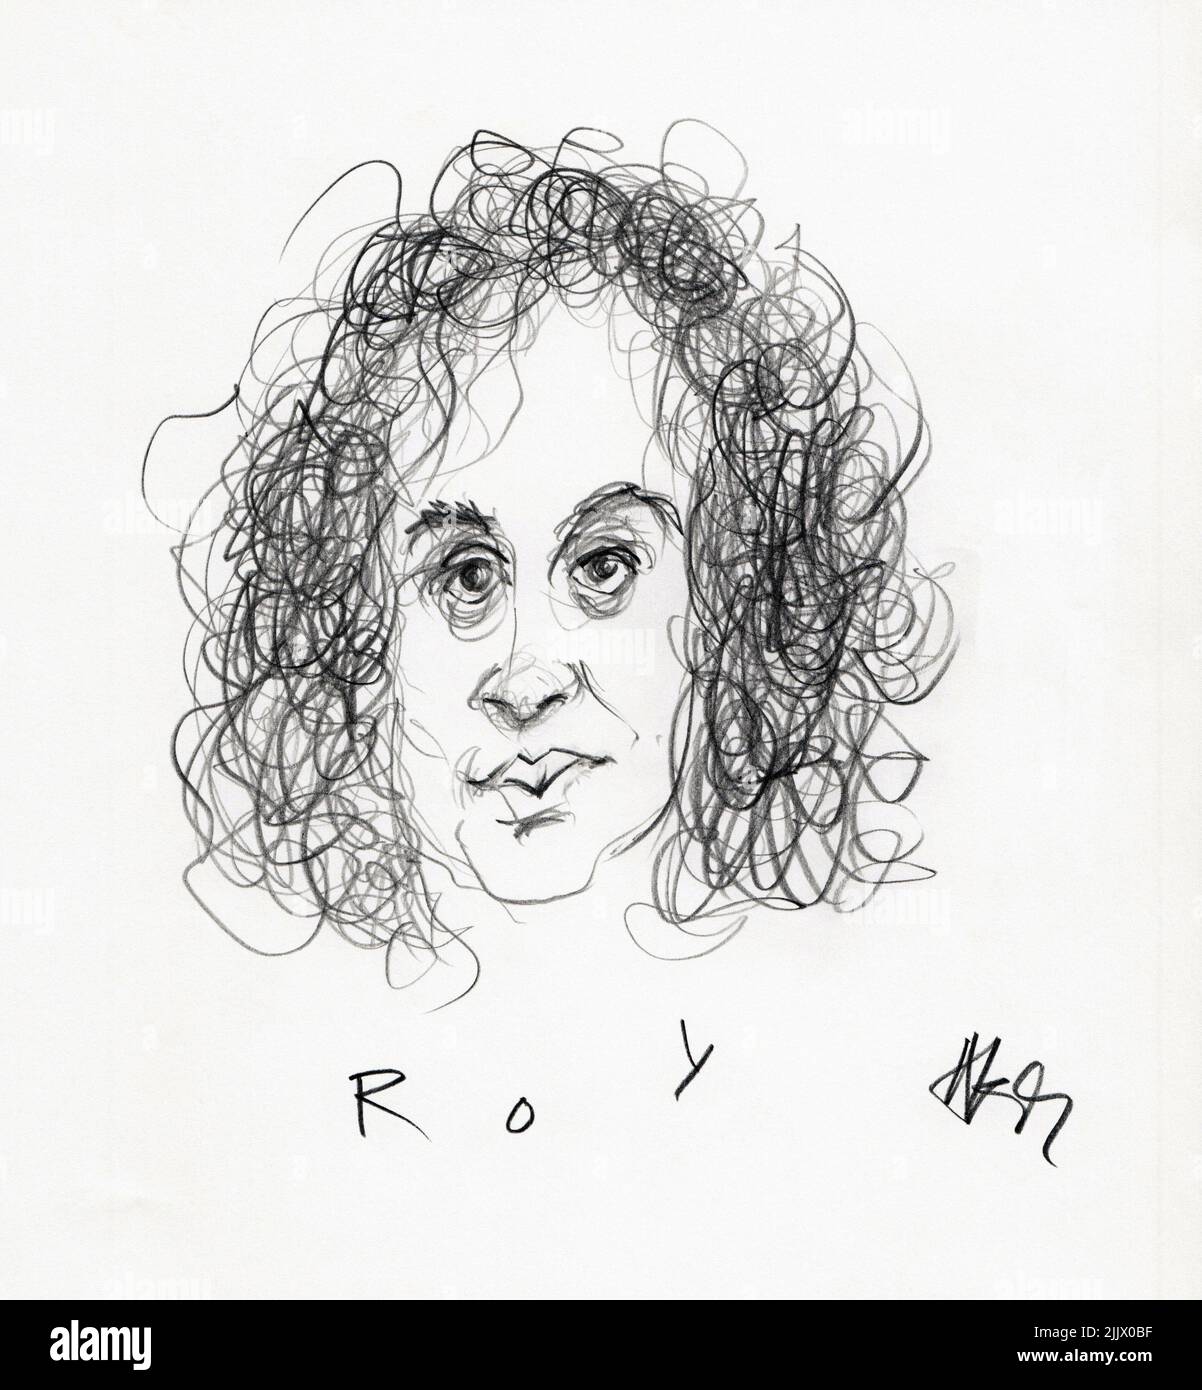 Arundhati Roy  draw with me  YouTube